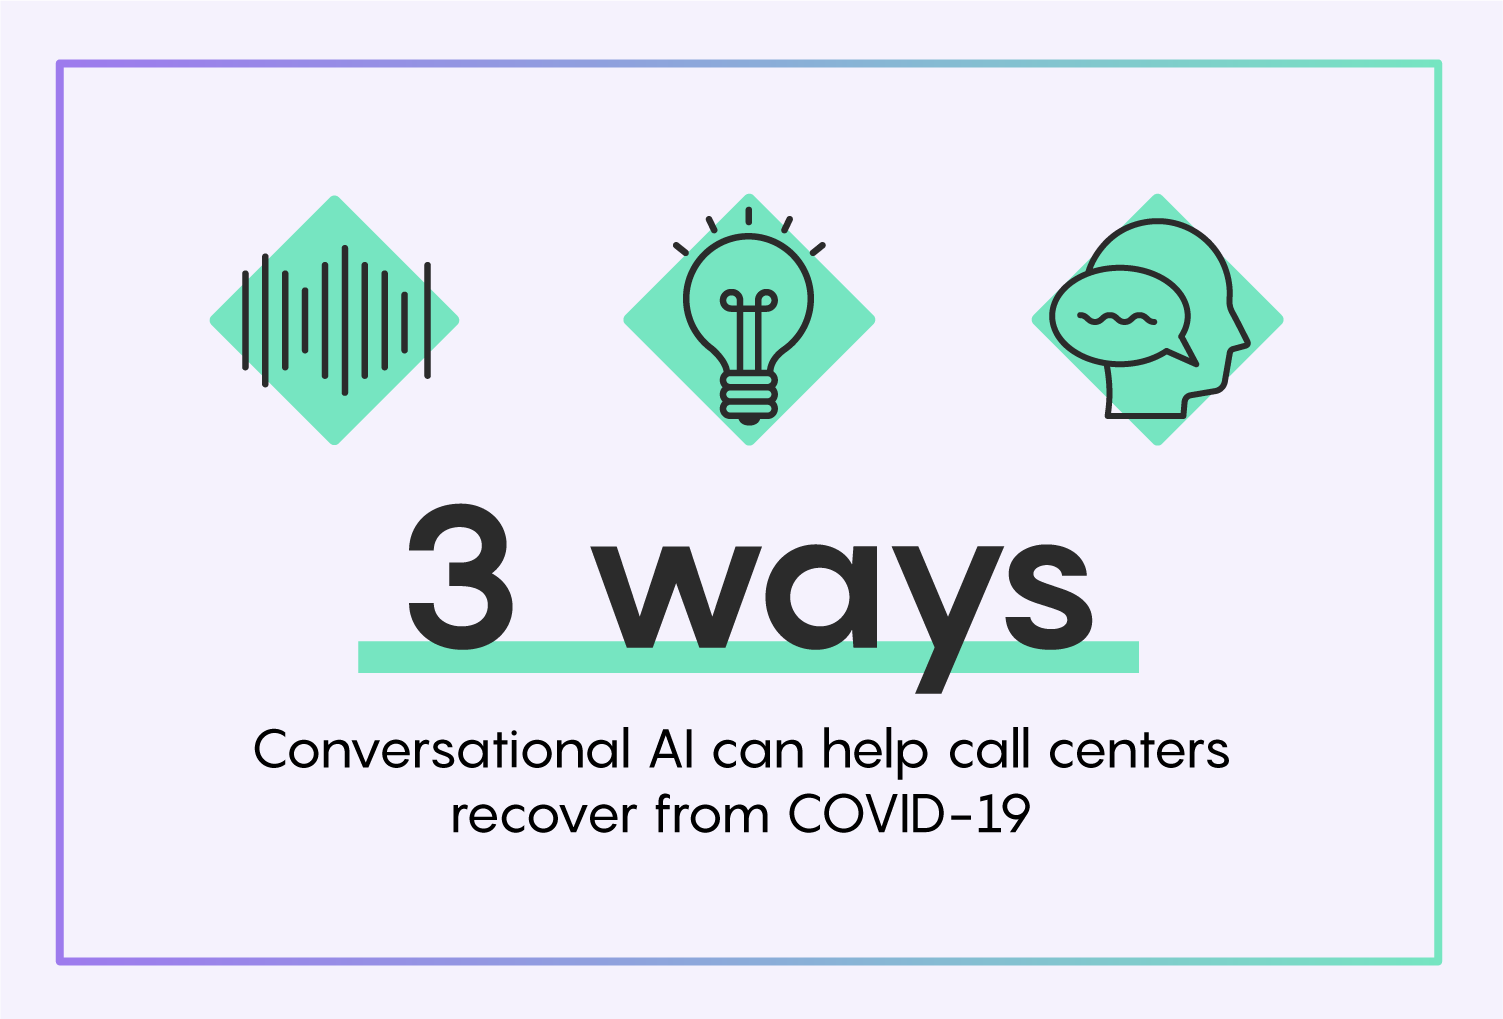 3 Ways Conversational AI Can Help Contact Centers Recover from COVID-19